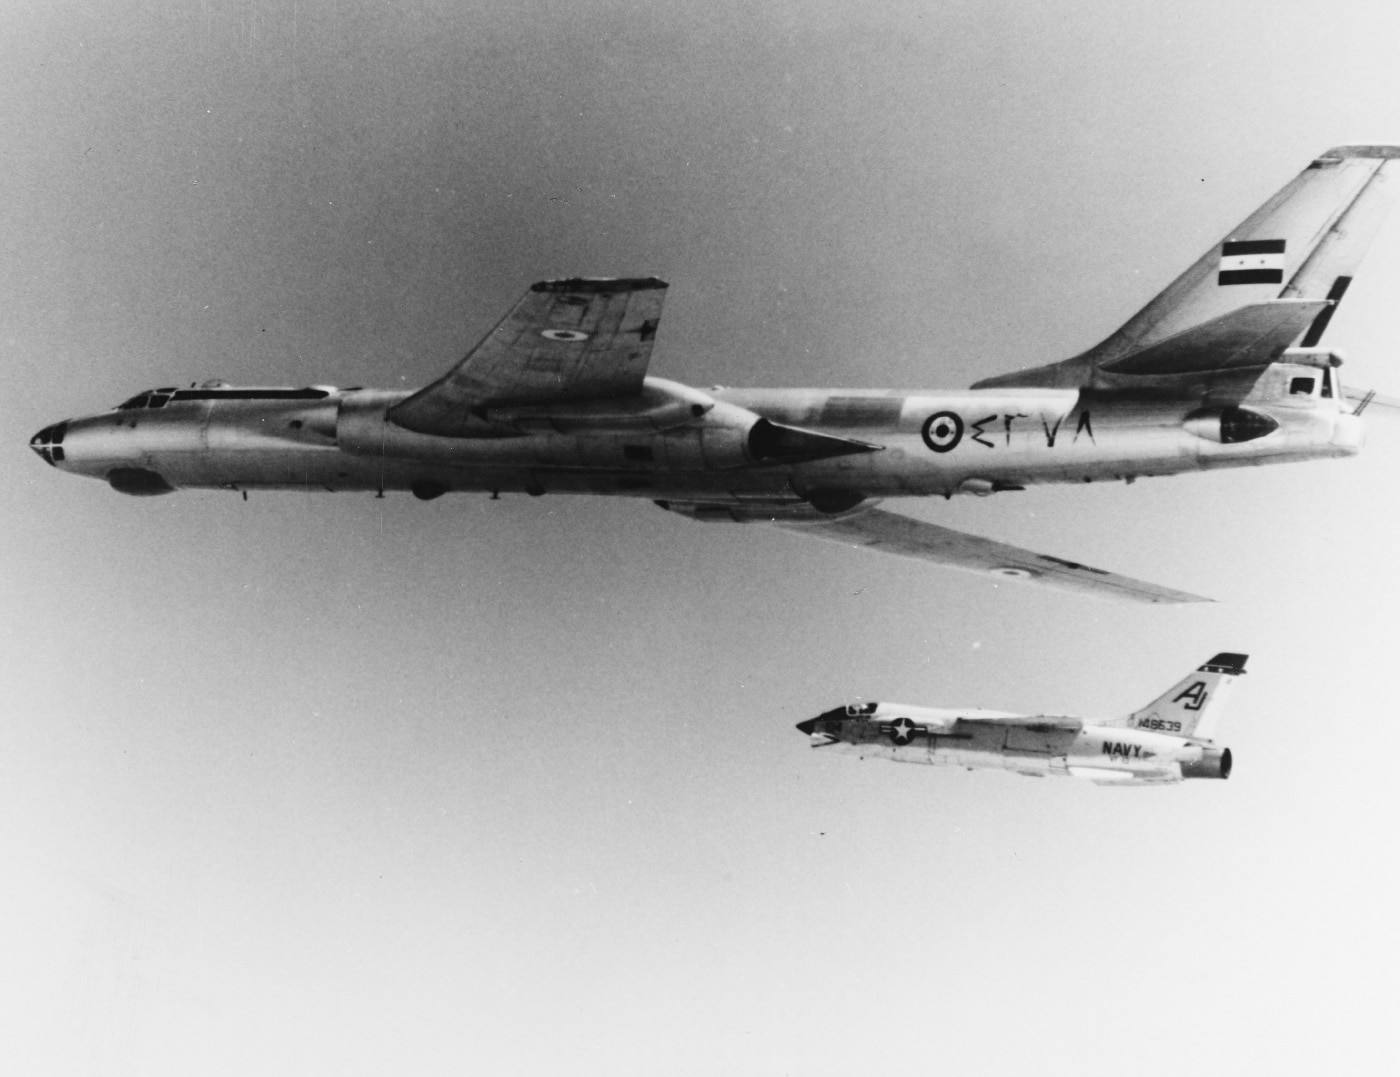 In this photo, a U.S.N. F-8 escorts an Egyptian TU-16 Badger bomber away from a NATO exercise in the Mediterranean Sea. The USN was working with the British Marines and French Navy in a combined arms exercise. 